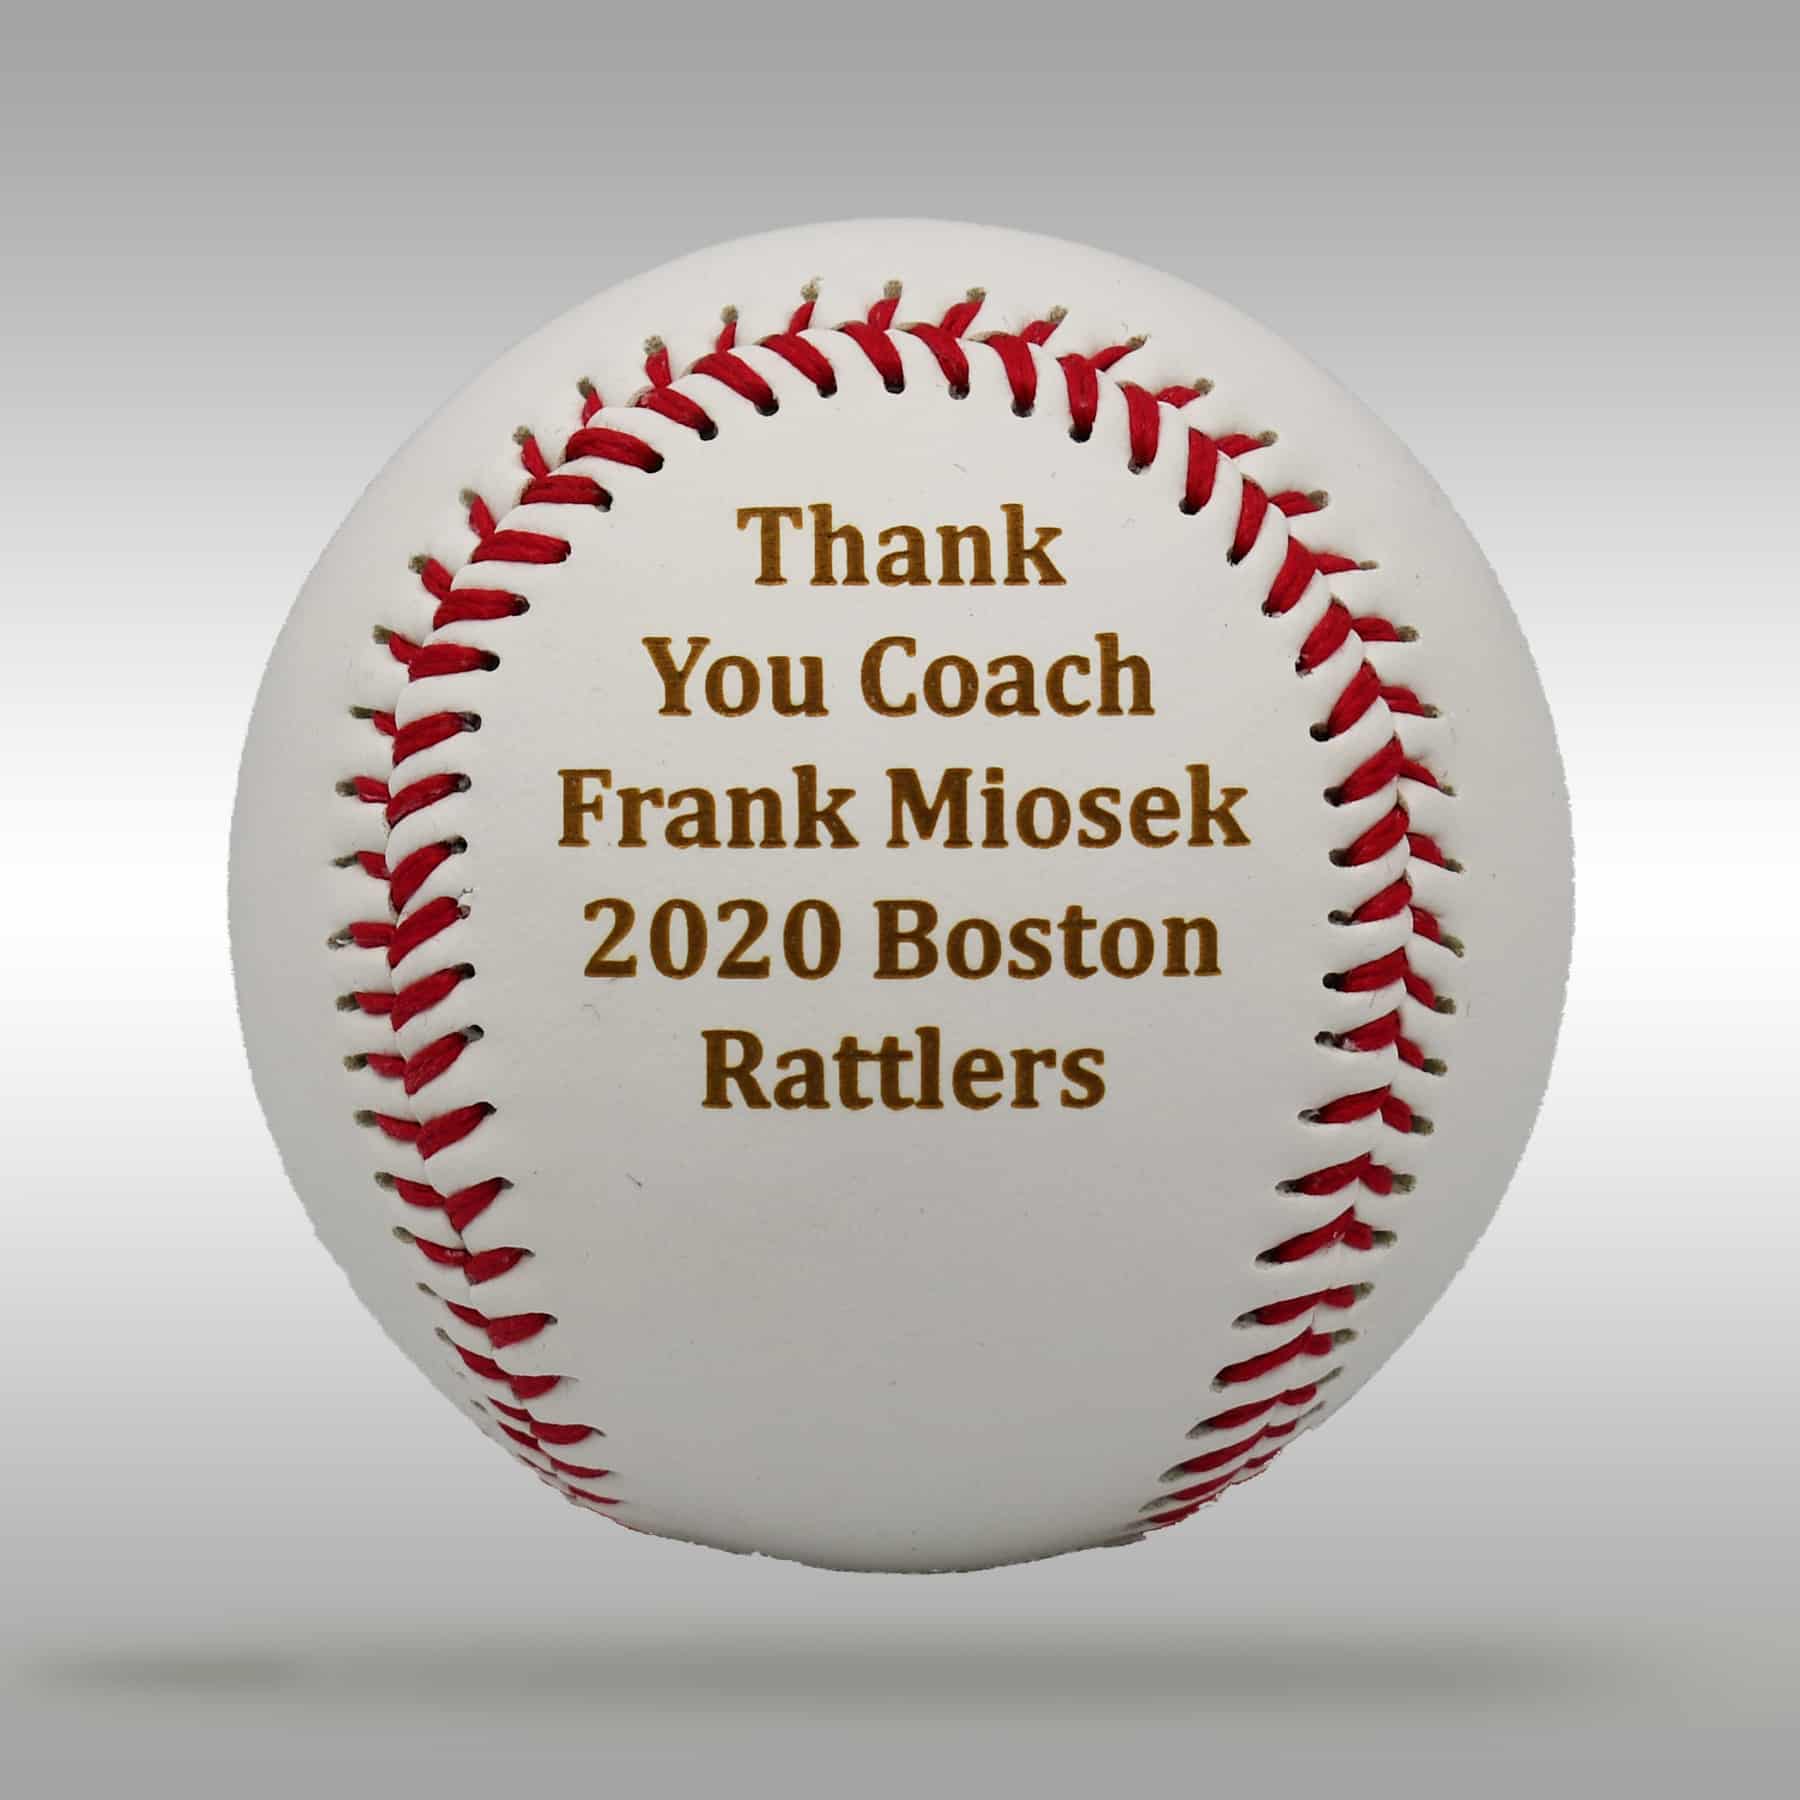 Engraved Player/Coach Gift Baseball - Cooperstown Bat Company